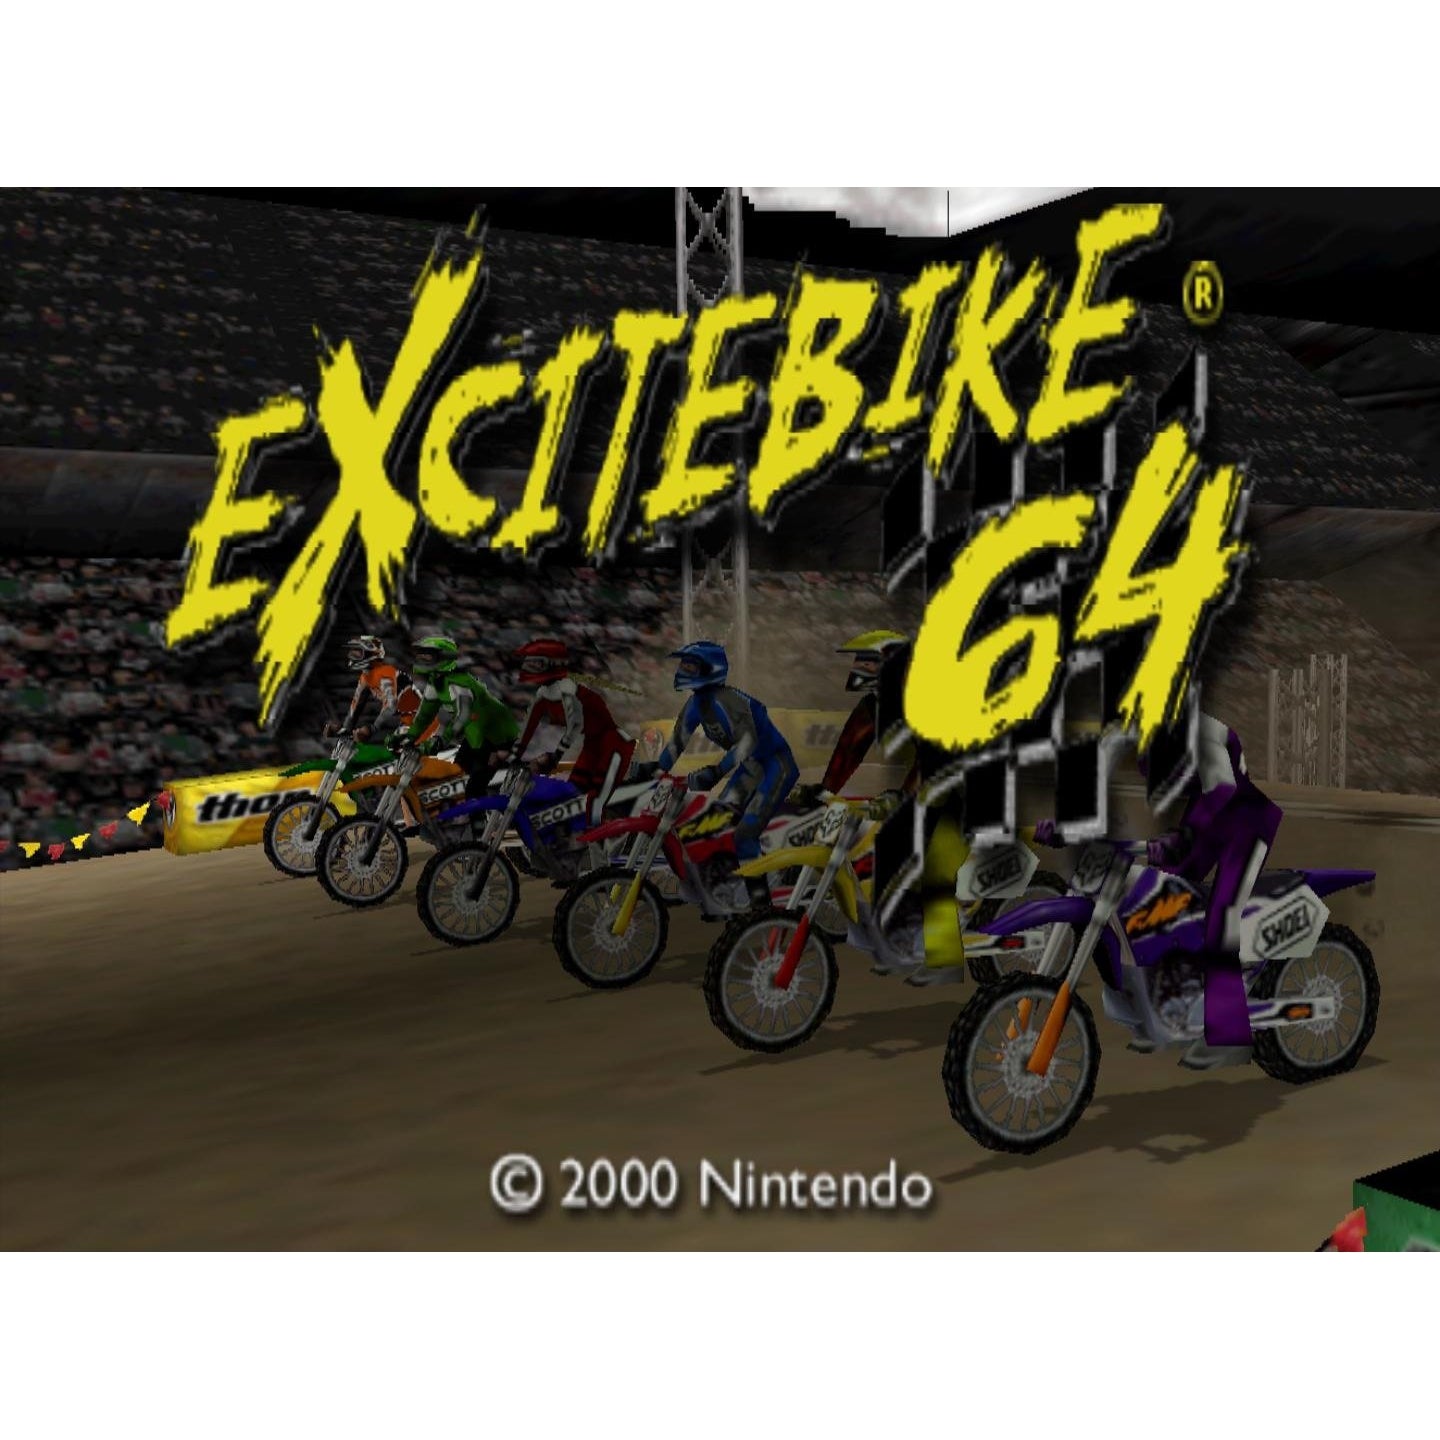 Excitebike 64 - Authentic Nintendo 64 (N64) Game Cartridge - YourGamingShop.com - Buy, Sell, Trade Video Games Online. 120 Day Warranty. Satisfaction Guaranteed.